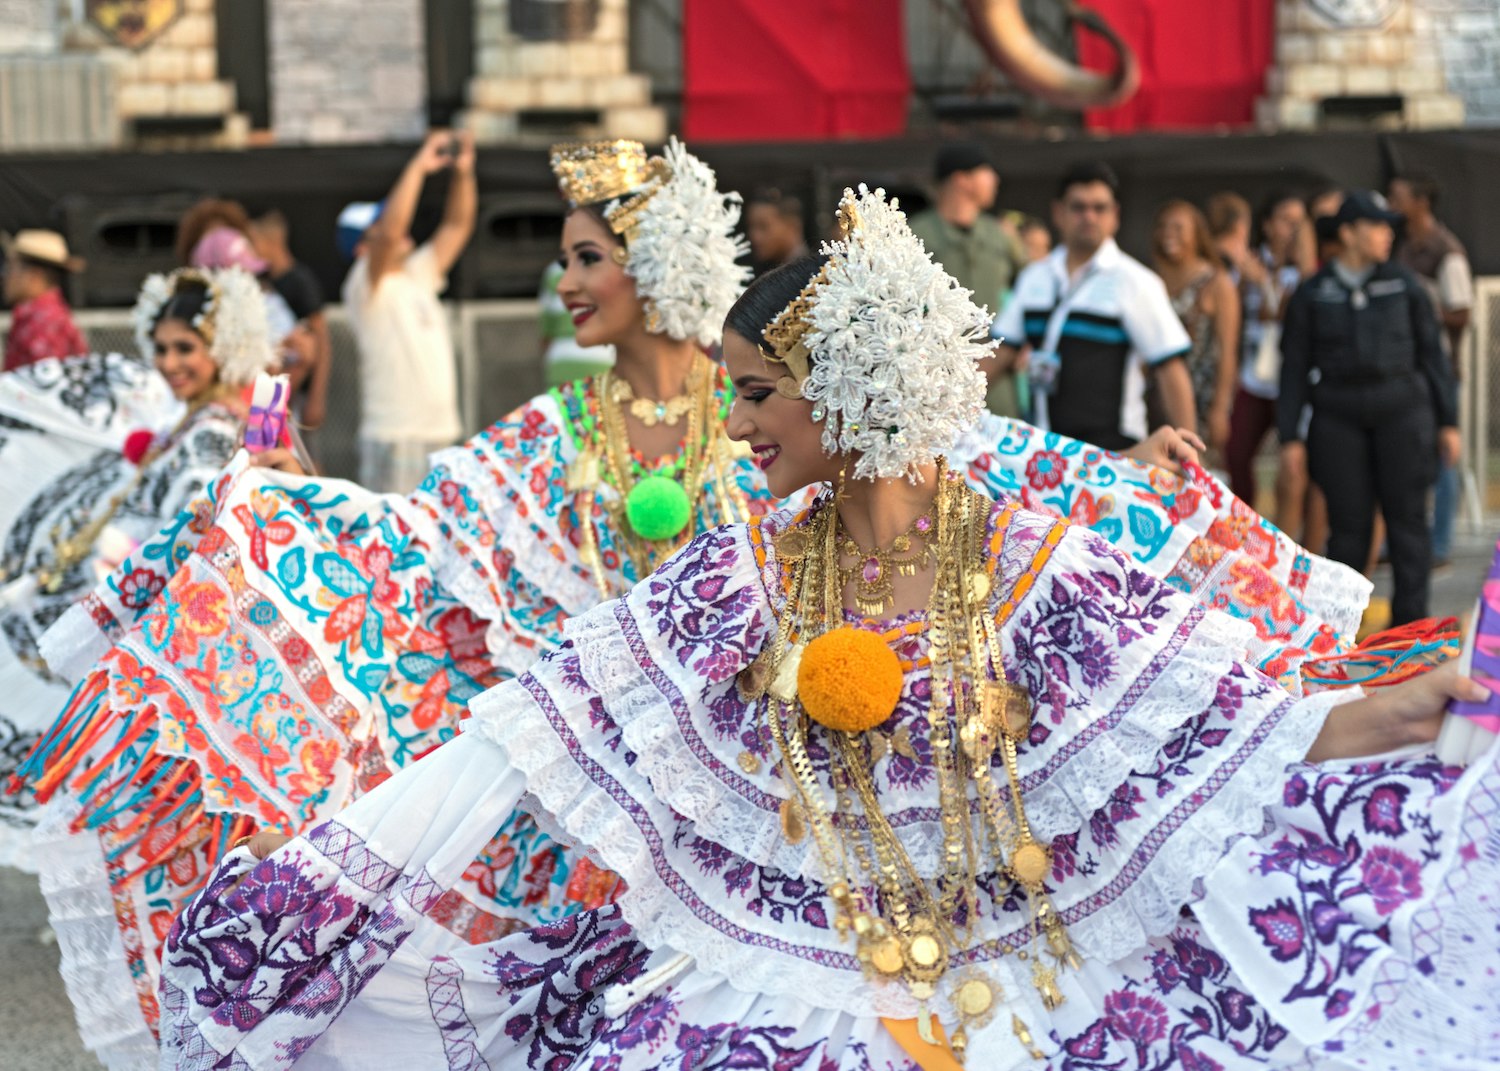 Dancers in traditional costume at the carnival in the streets of Panama City